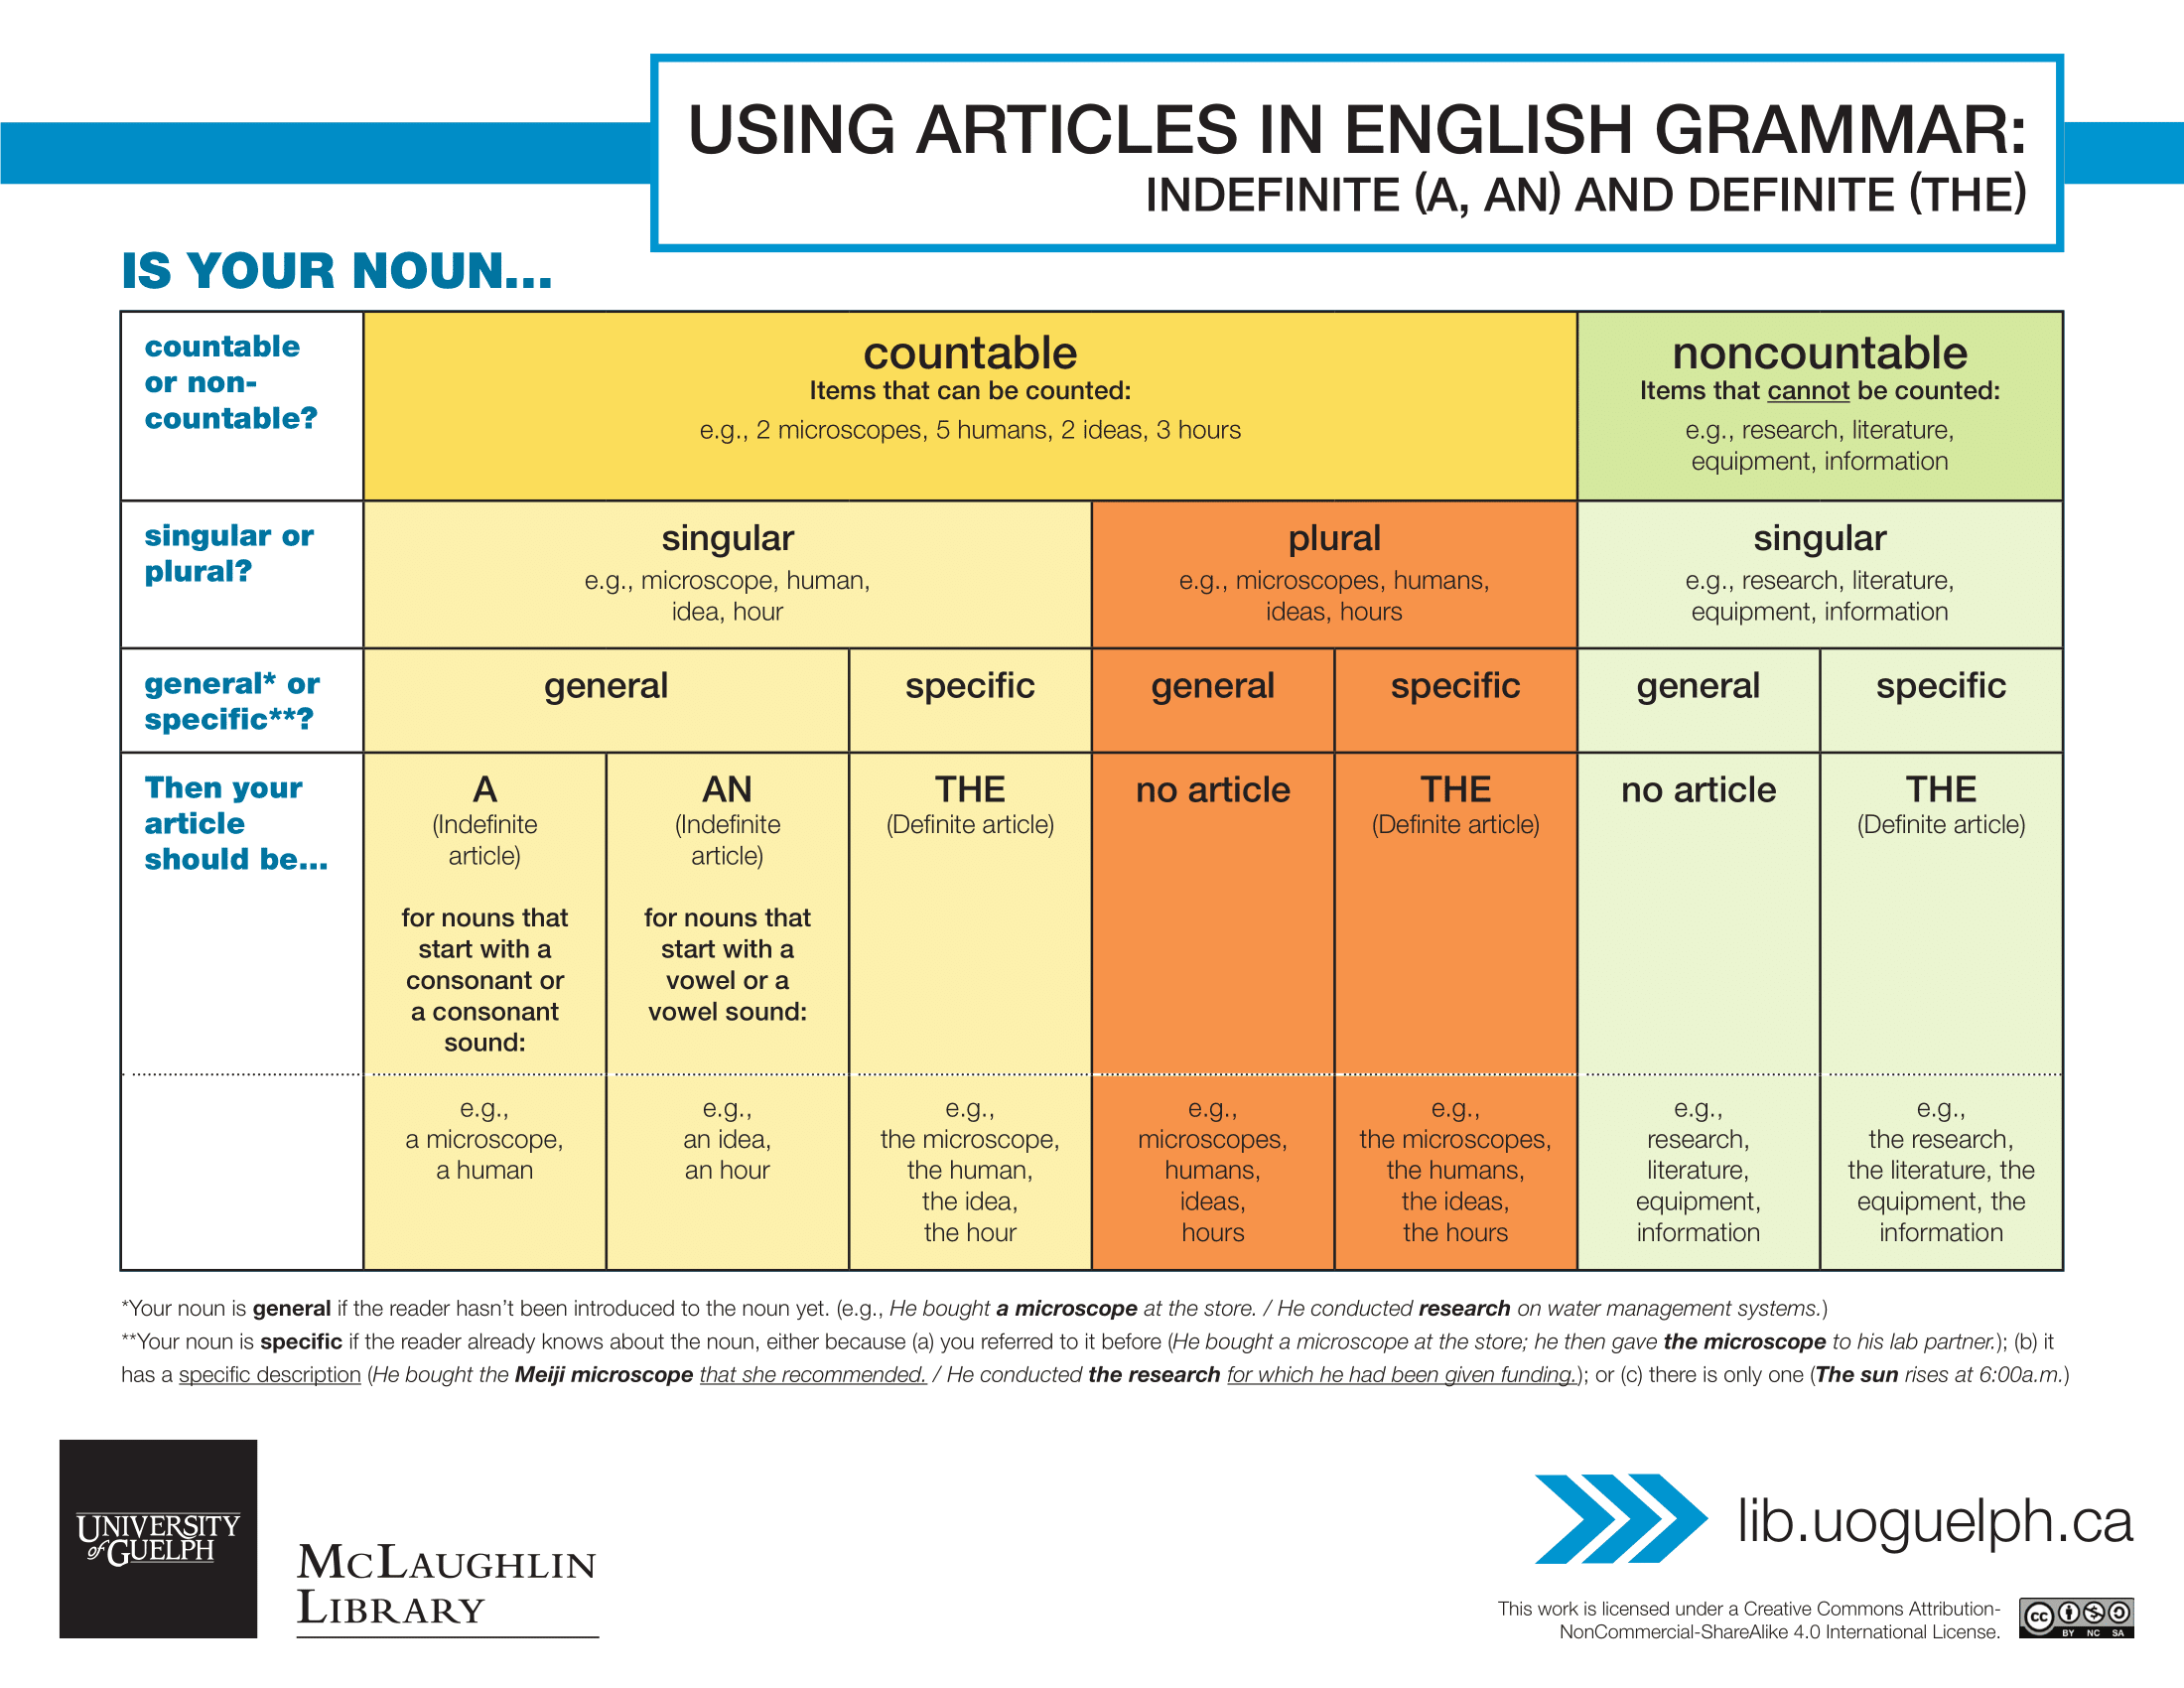 Handout: Using Articles in English Grammar: Indefinite (A, An) and Definite (The). Full transcript is available below